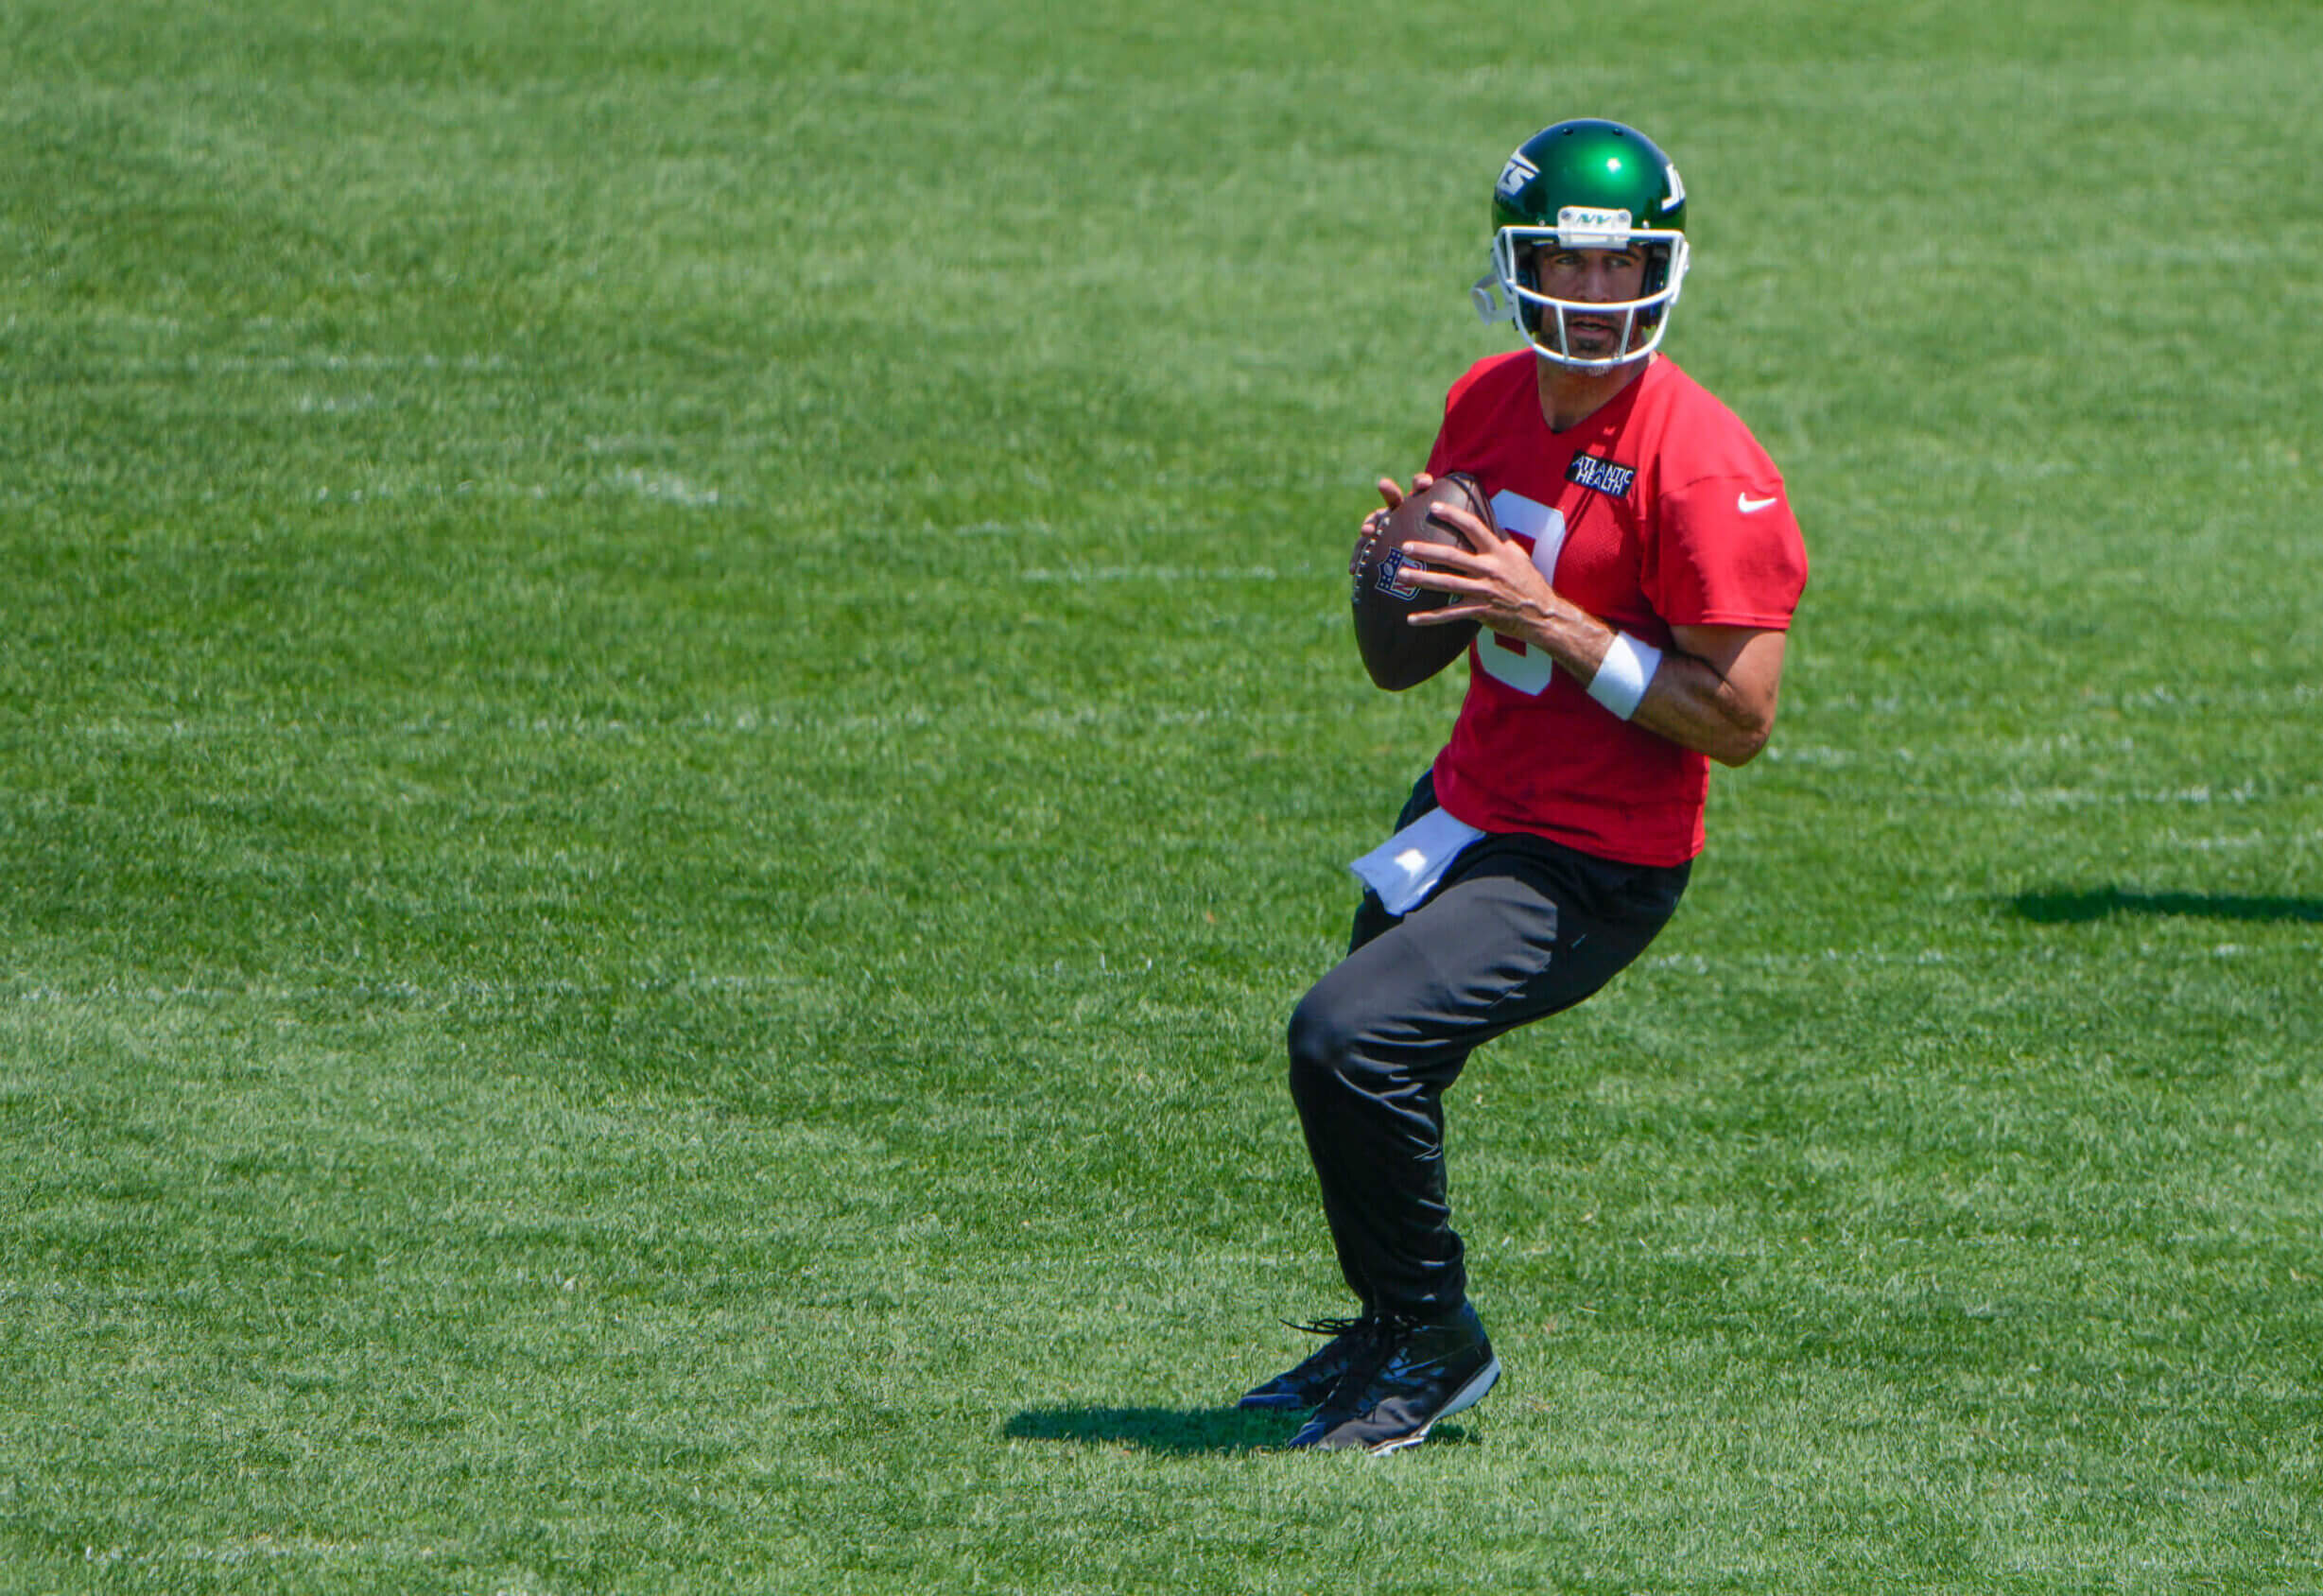 Jets observations: Aaron Rodgers returns to practice looking like his old self